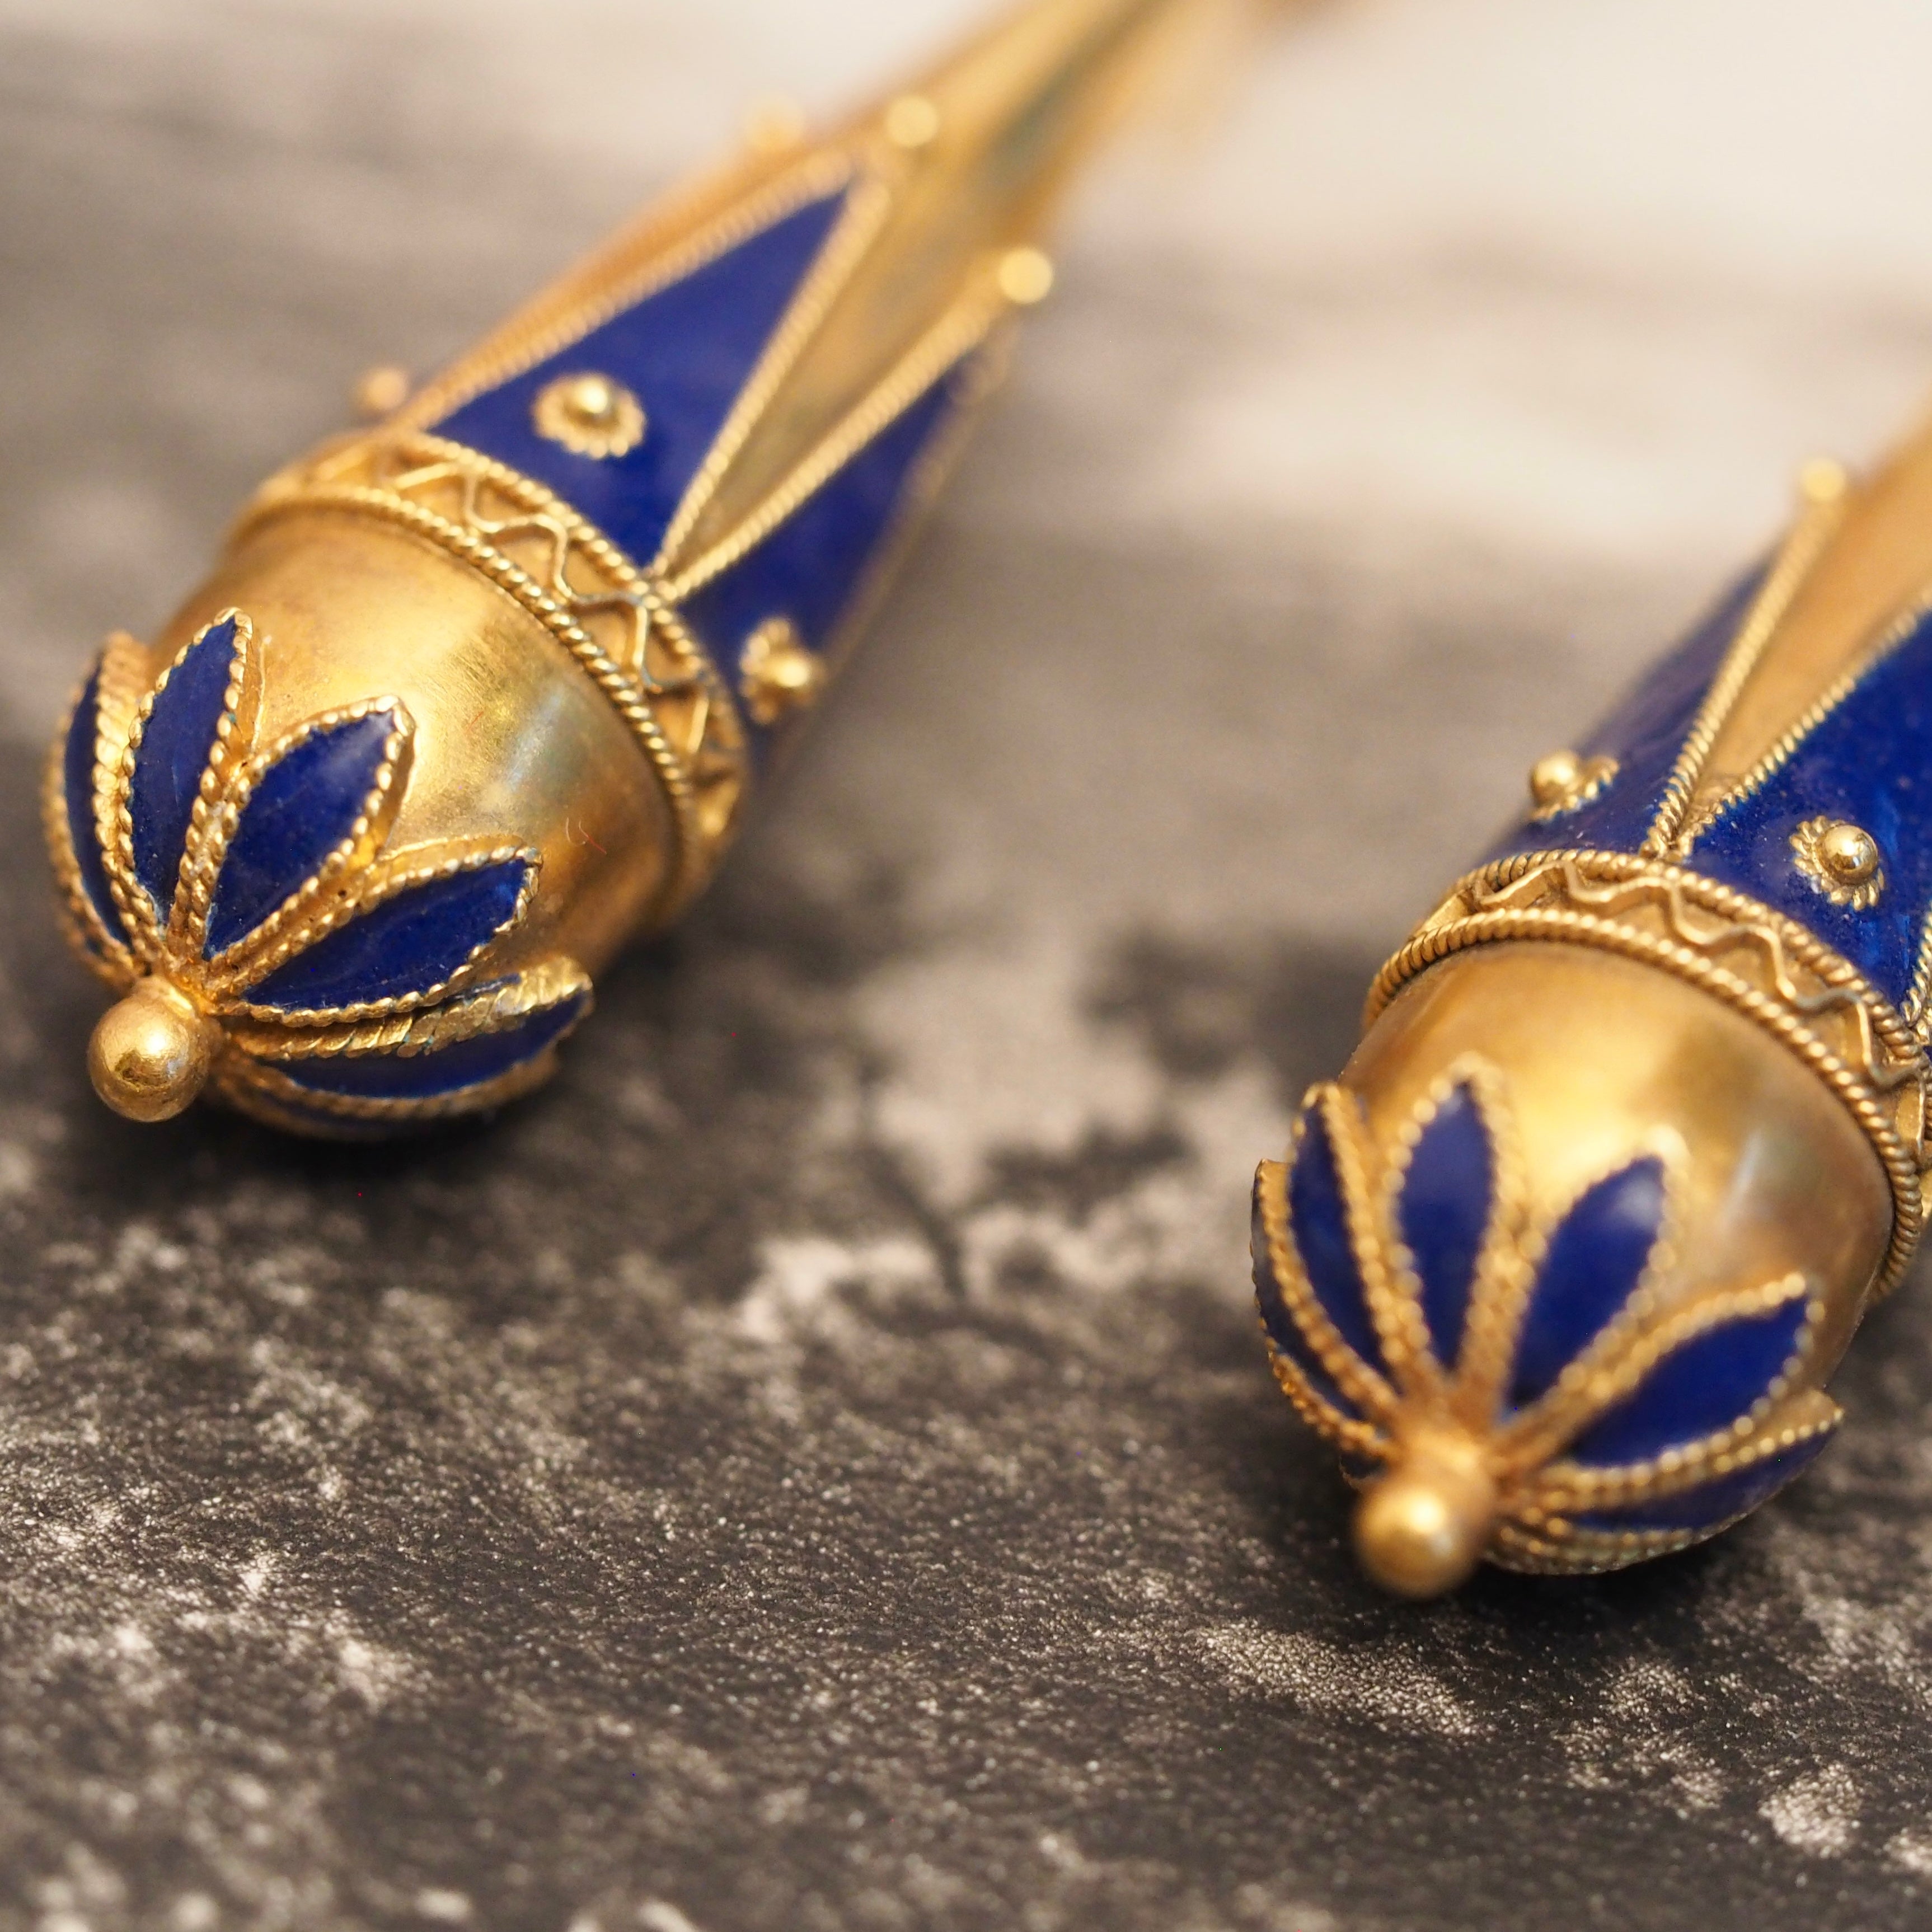 Antique English Victorian 15k Gold and Enamel Torpedo Earrings